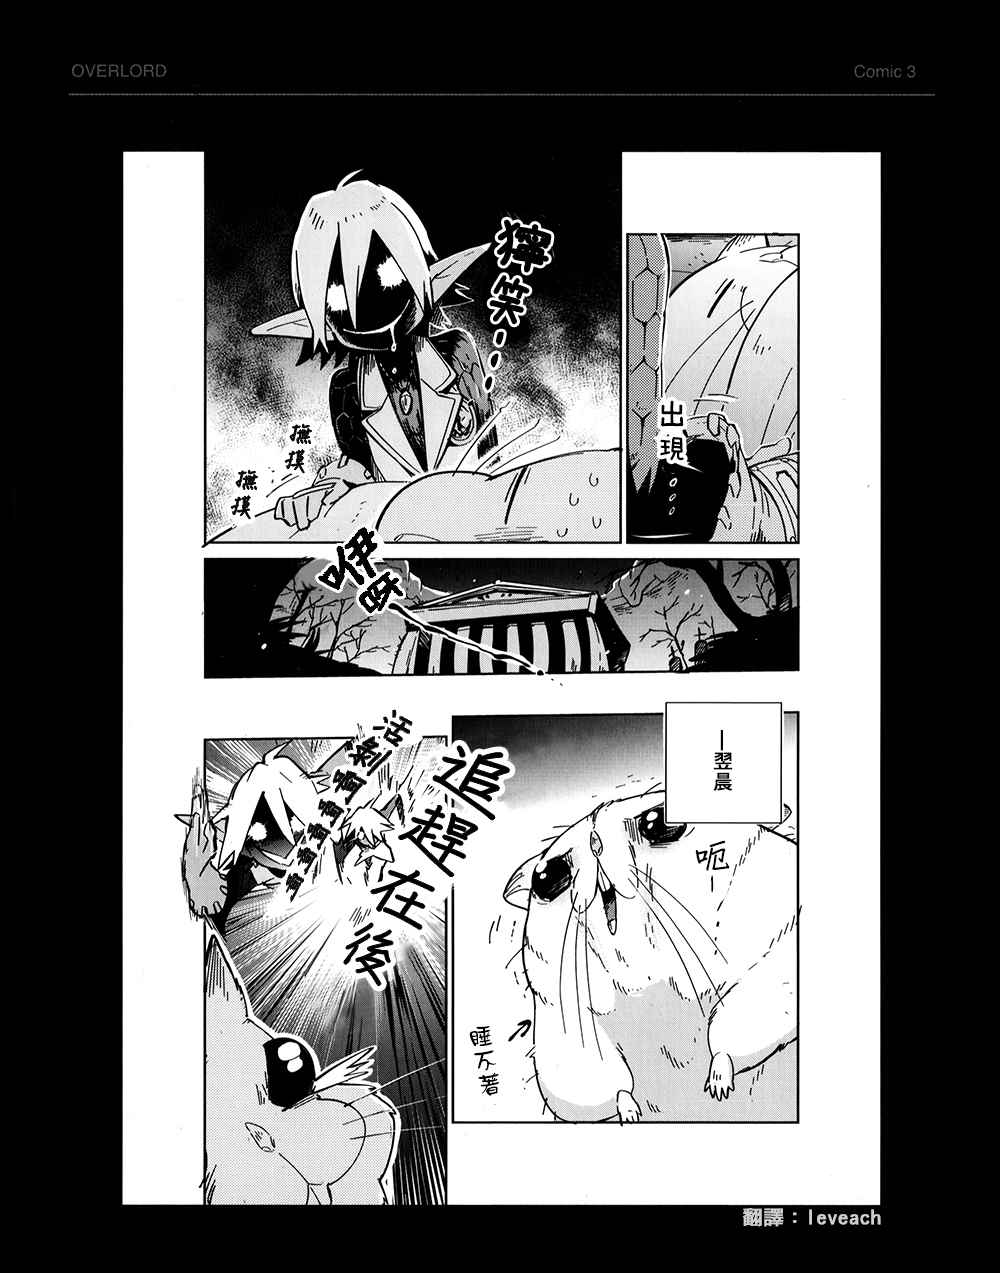 《OVERLORD》漫画 BD附录04